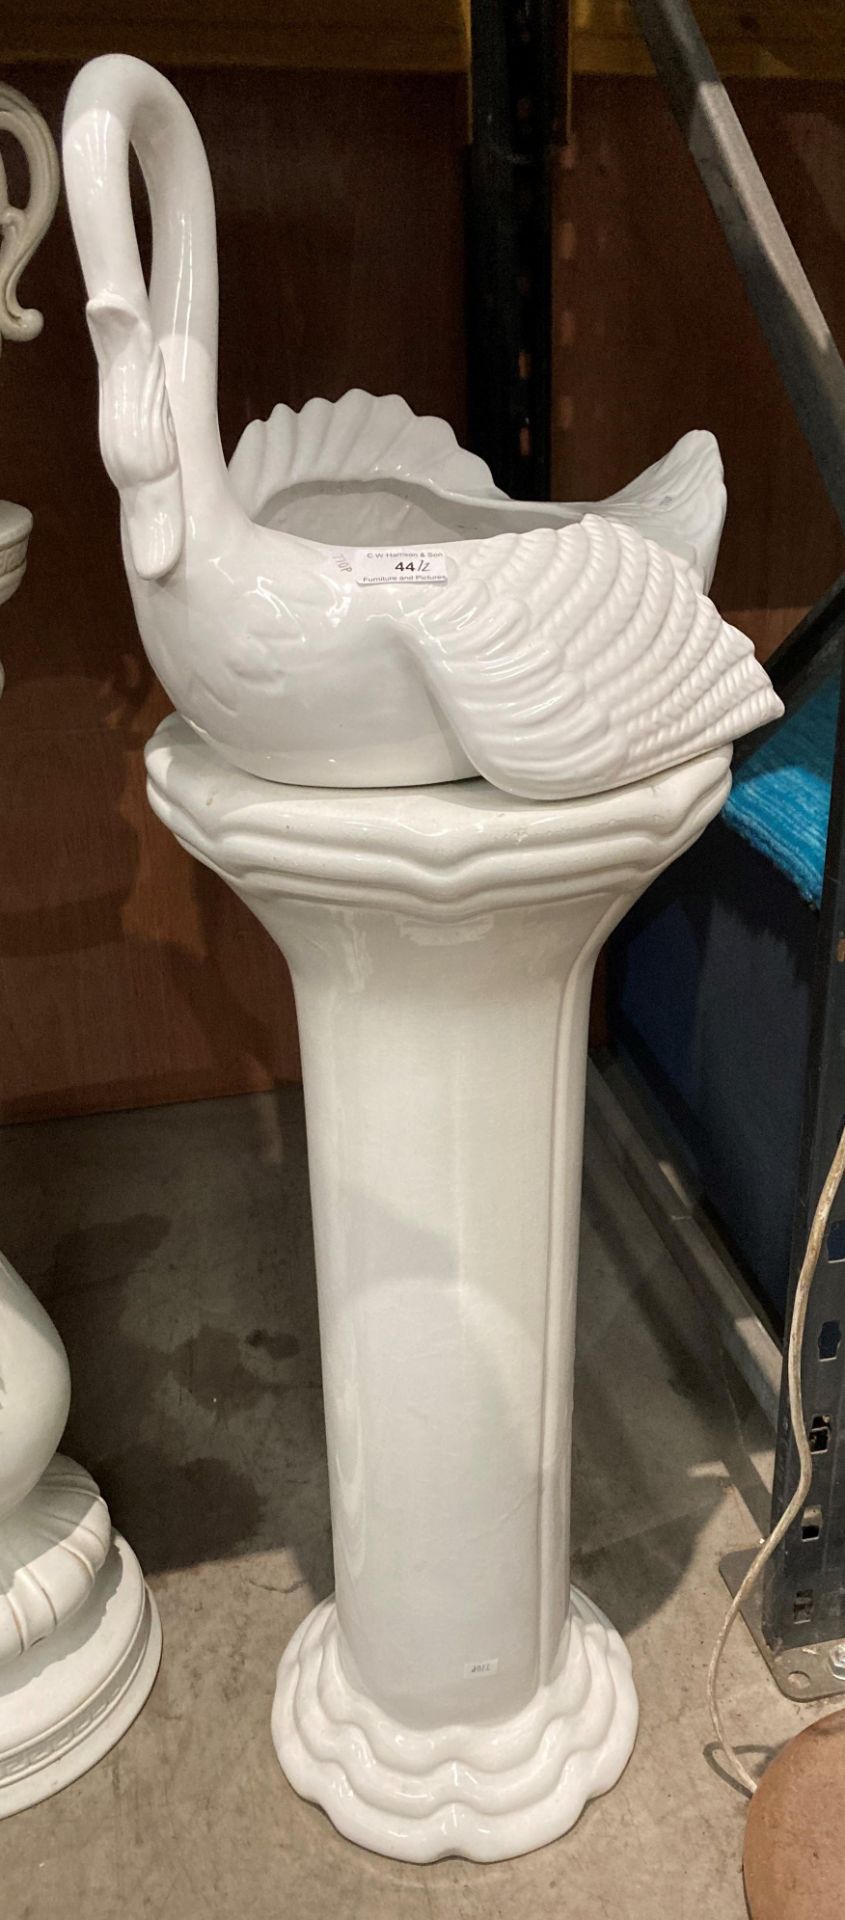 A white ceramic jardiniere stand with white ceramic swan planter on top, approximately 100cm high, - Image 2 of 4